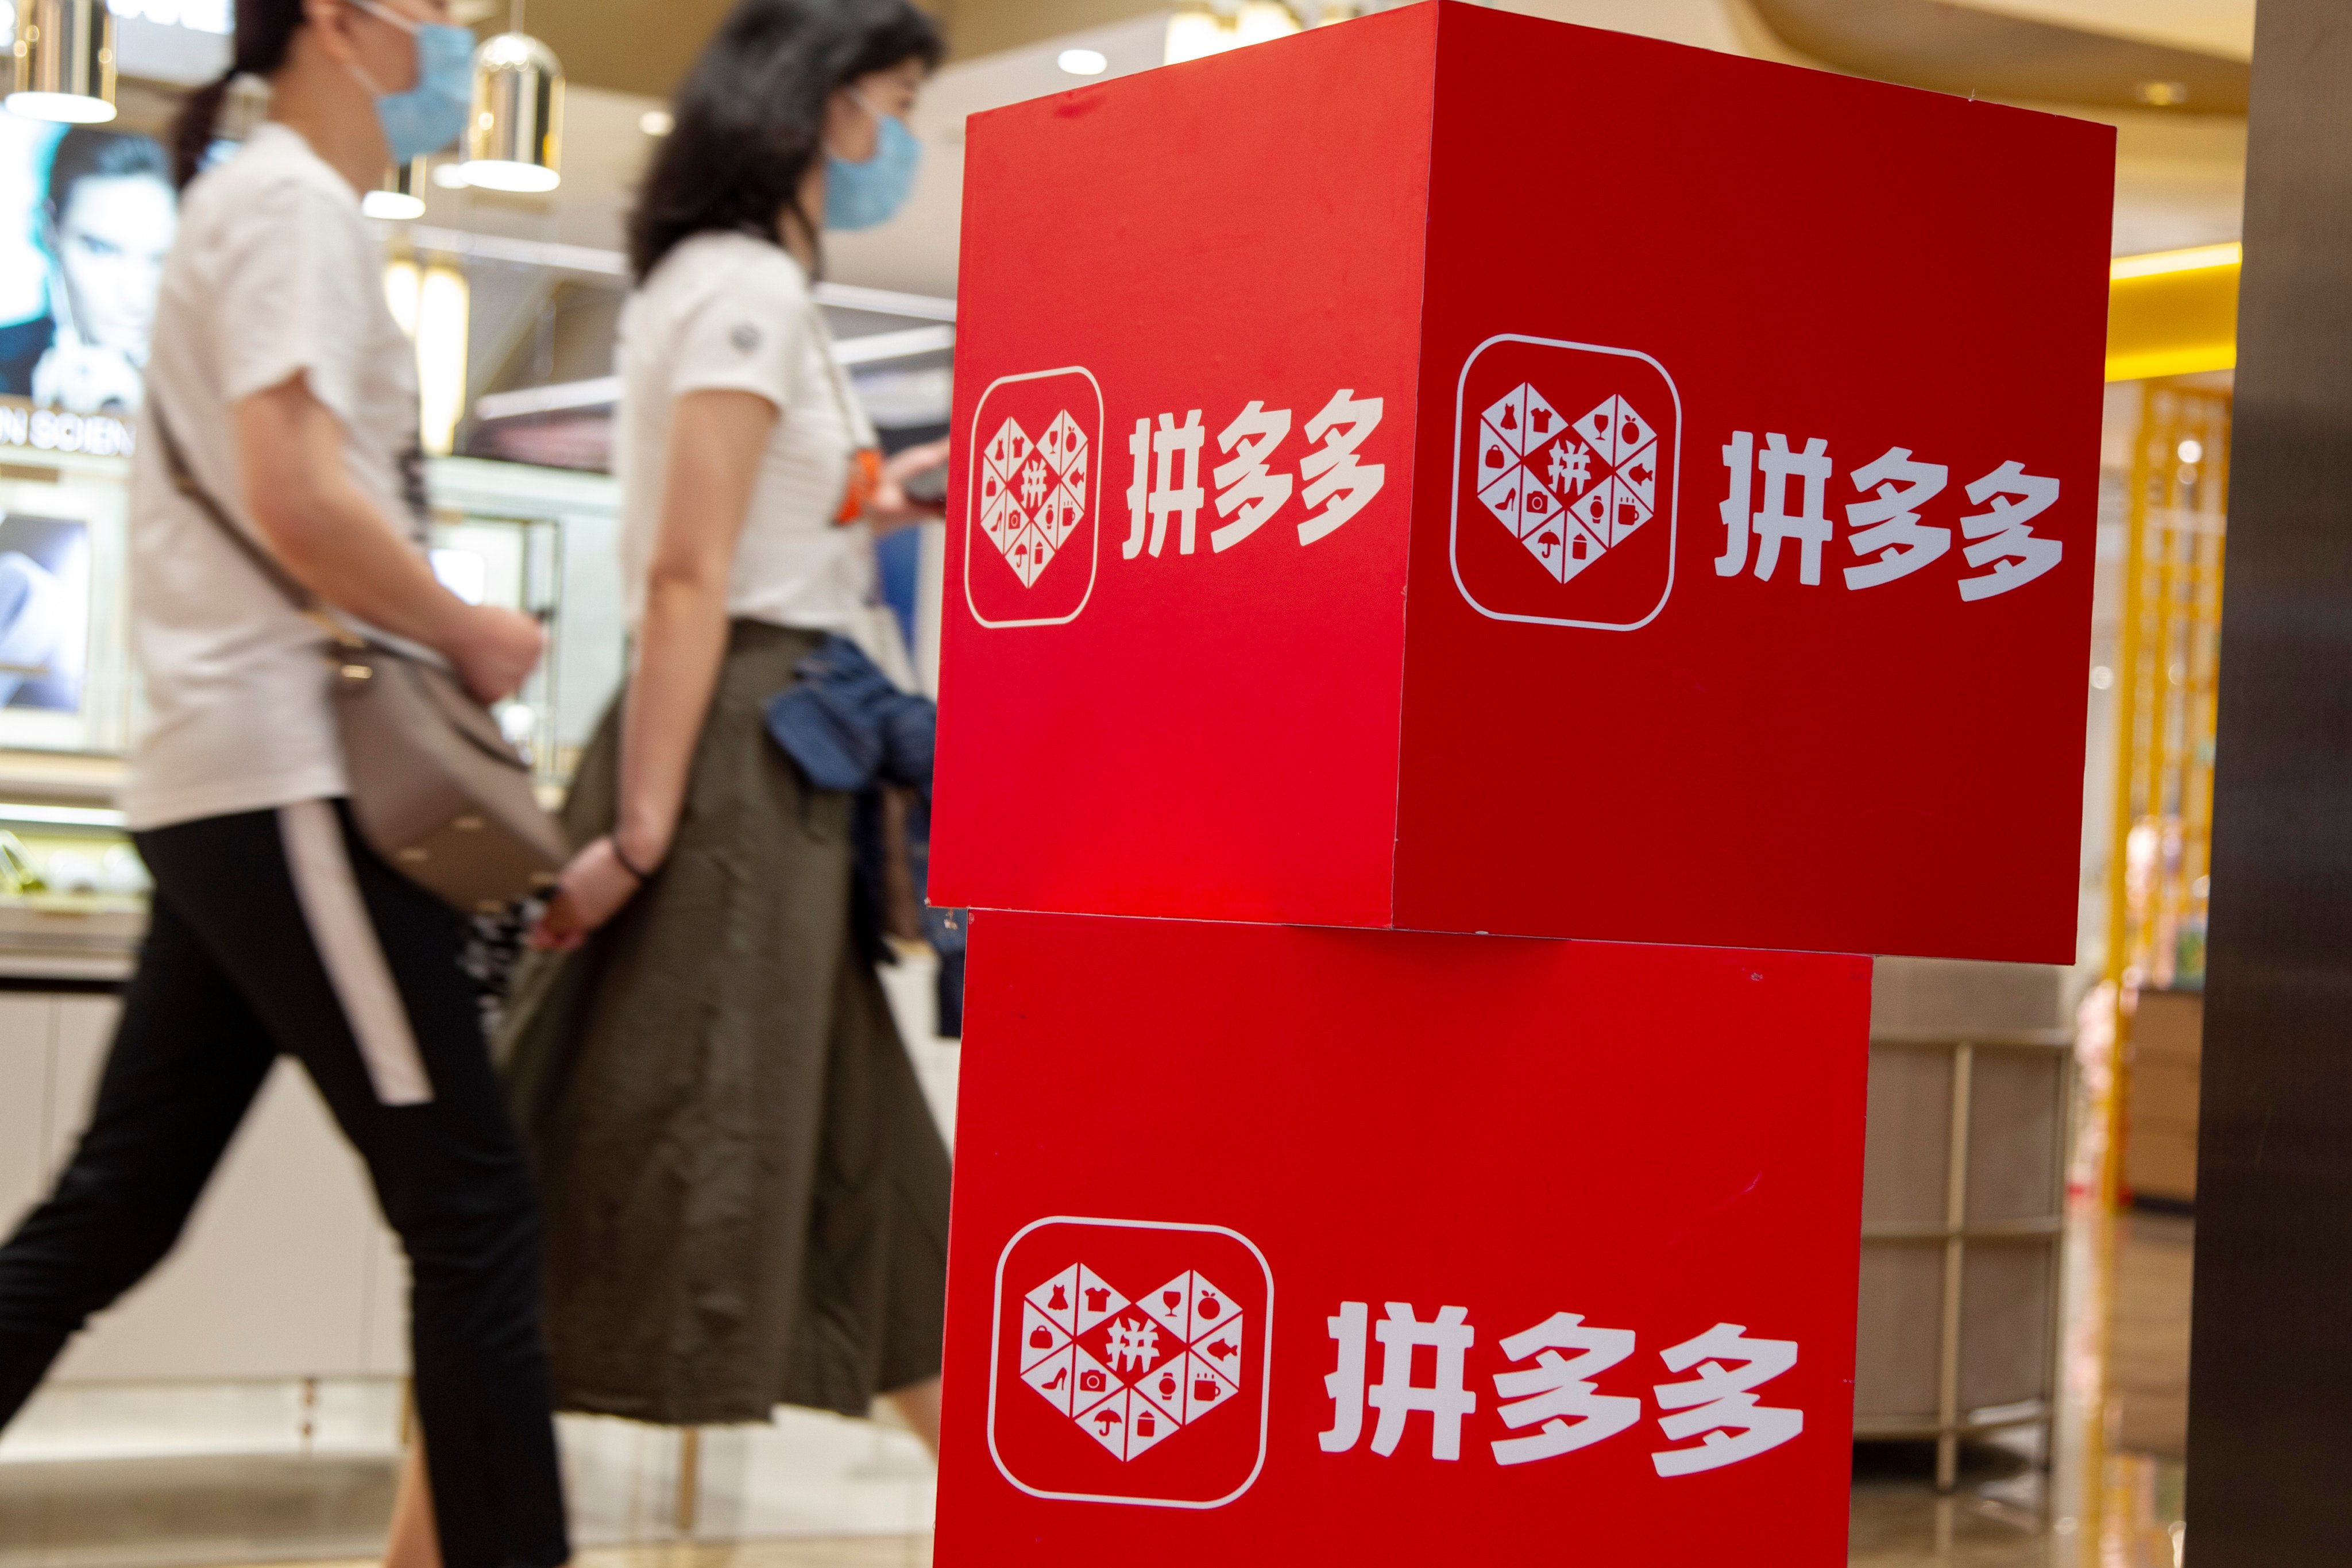 The logo of Pingduoduo is seen in a shopping mall in Shanghai in this May 2, 2020 file photo. Photo: AFP